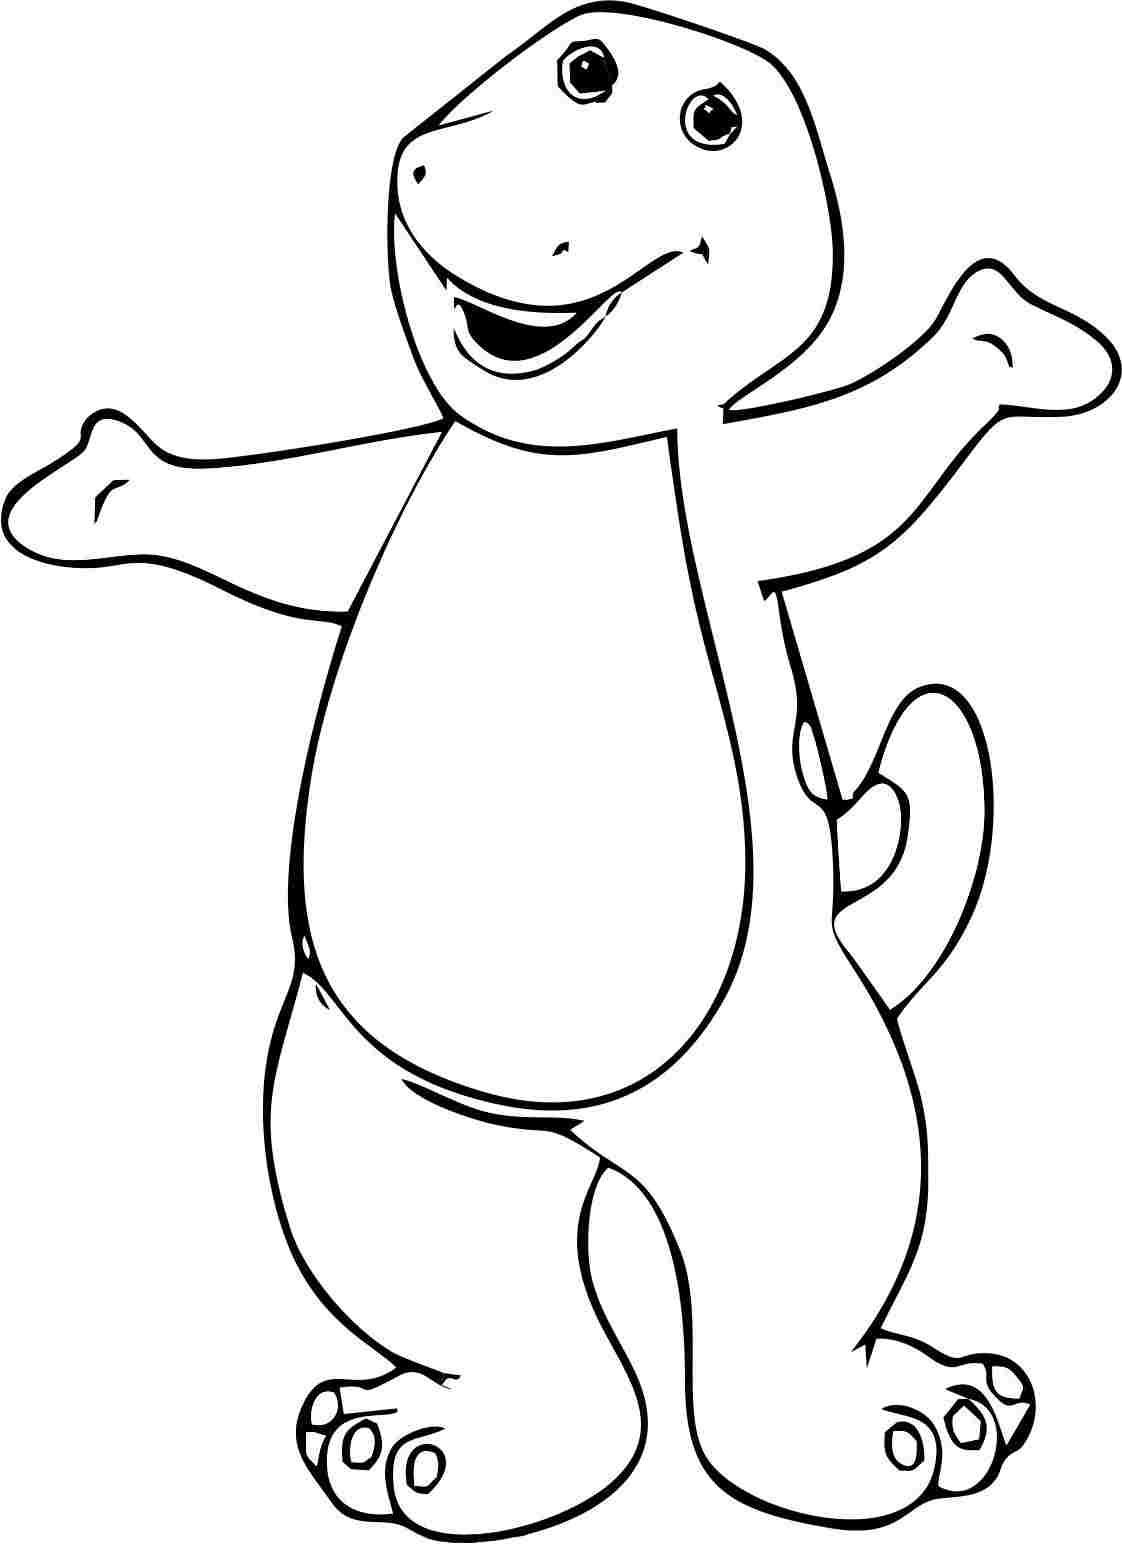 12 Pics of Barney And Friends Cartoon Coloring Pages Printable ...